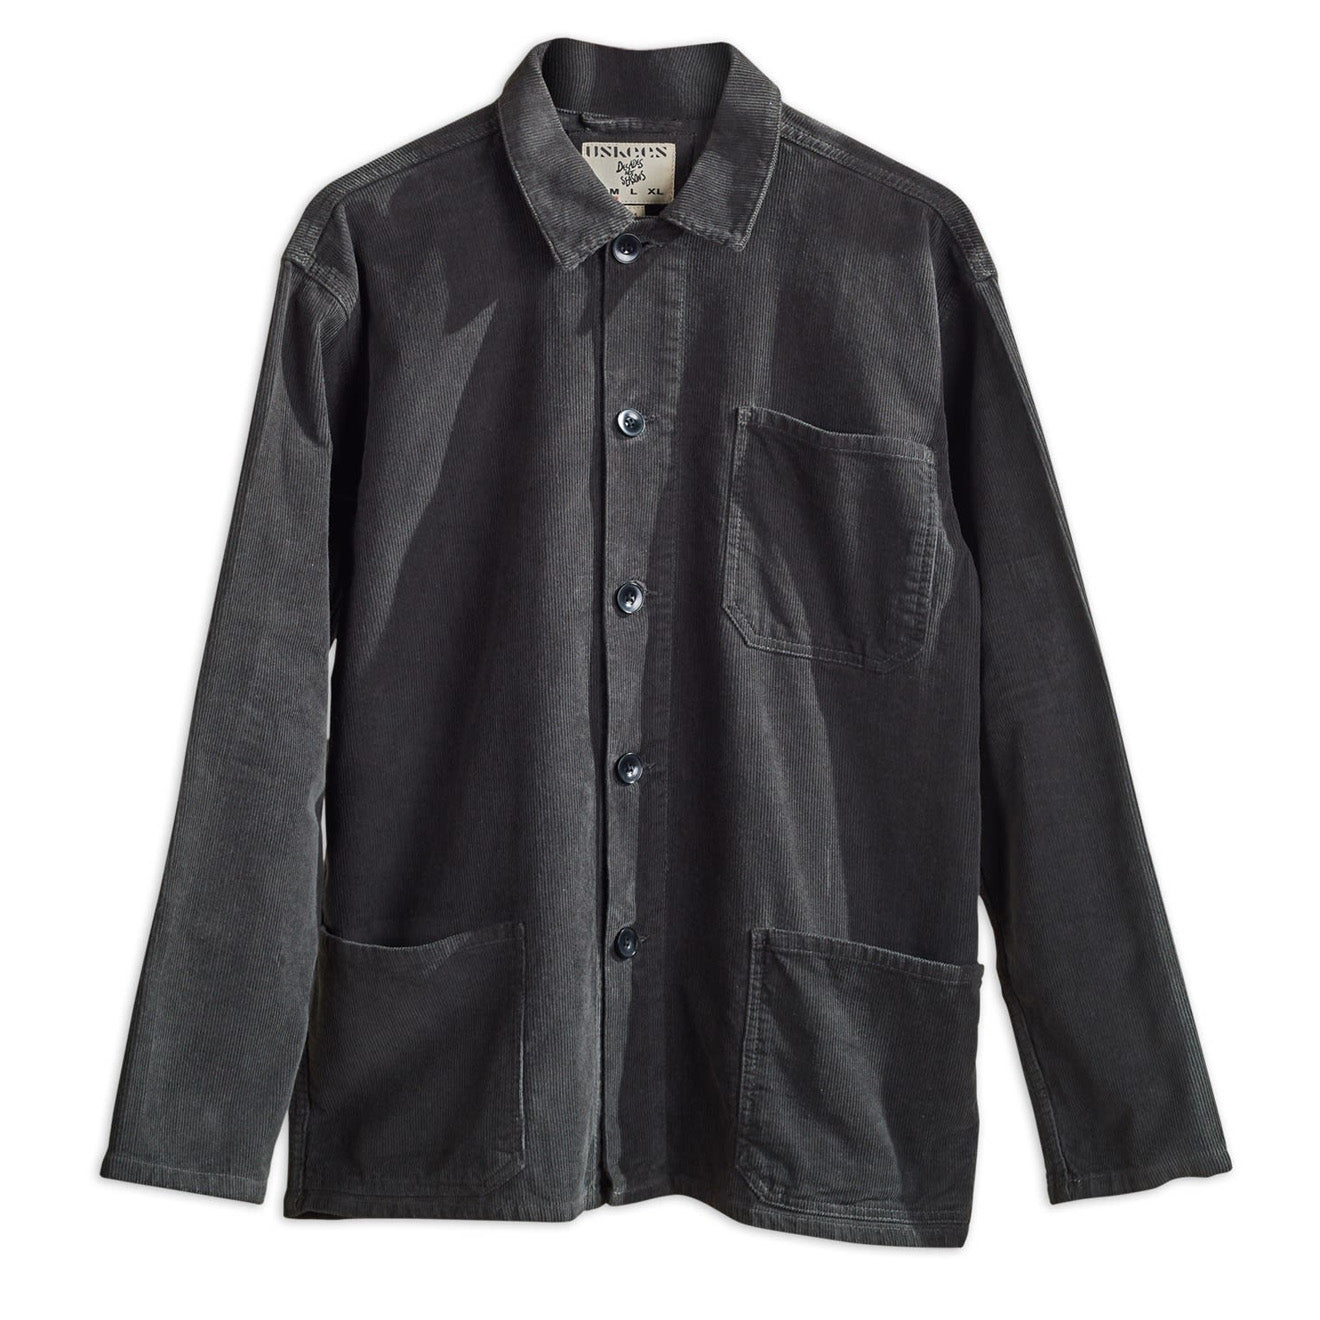 USKEES 3001 Buttoned Cord Overshirt Faded Black | The Sporting Lodge